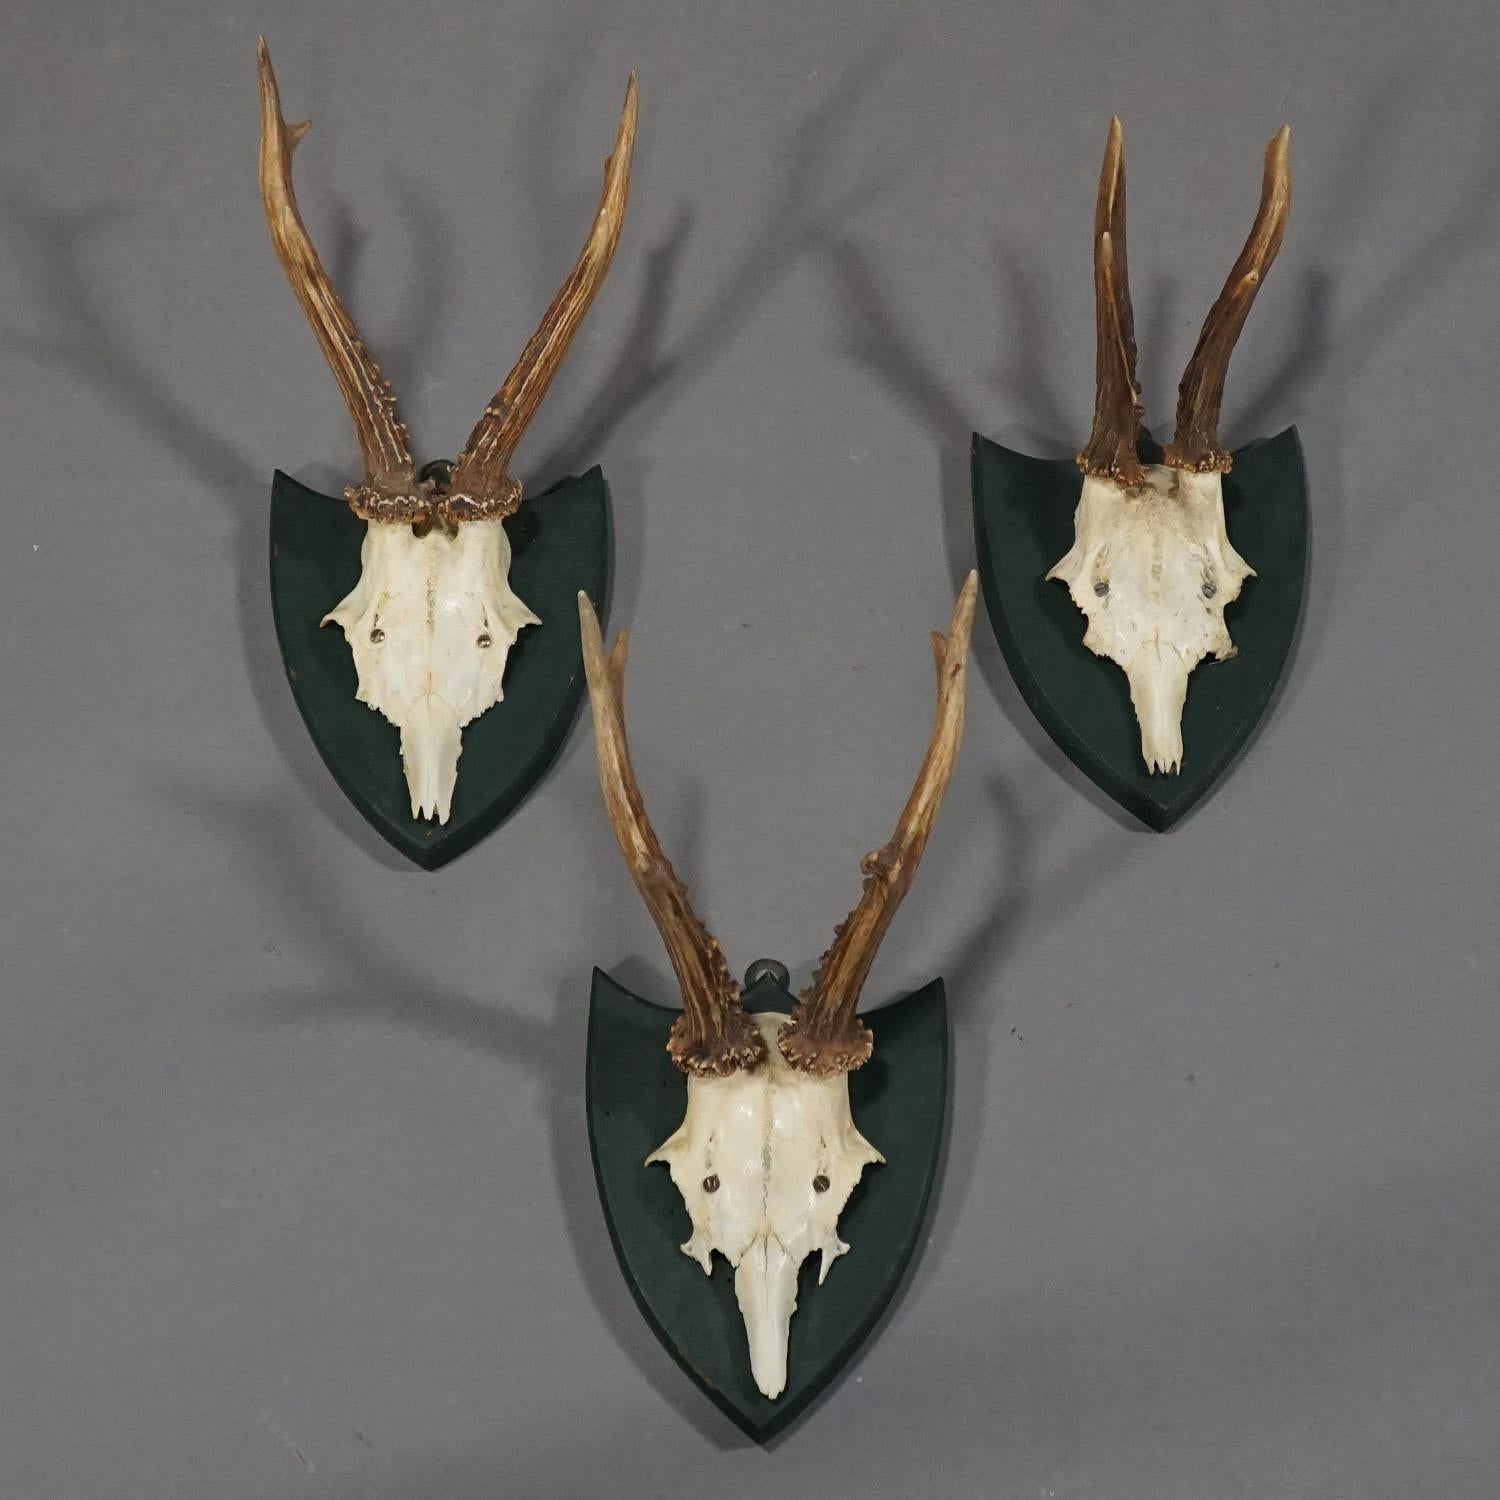 Rustic Six Large Antique Deer Trophies on Wooden Carved Plaques, circa 1860